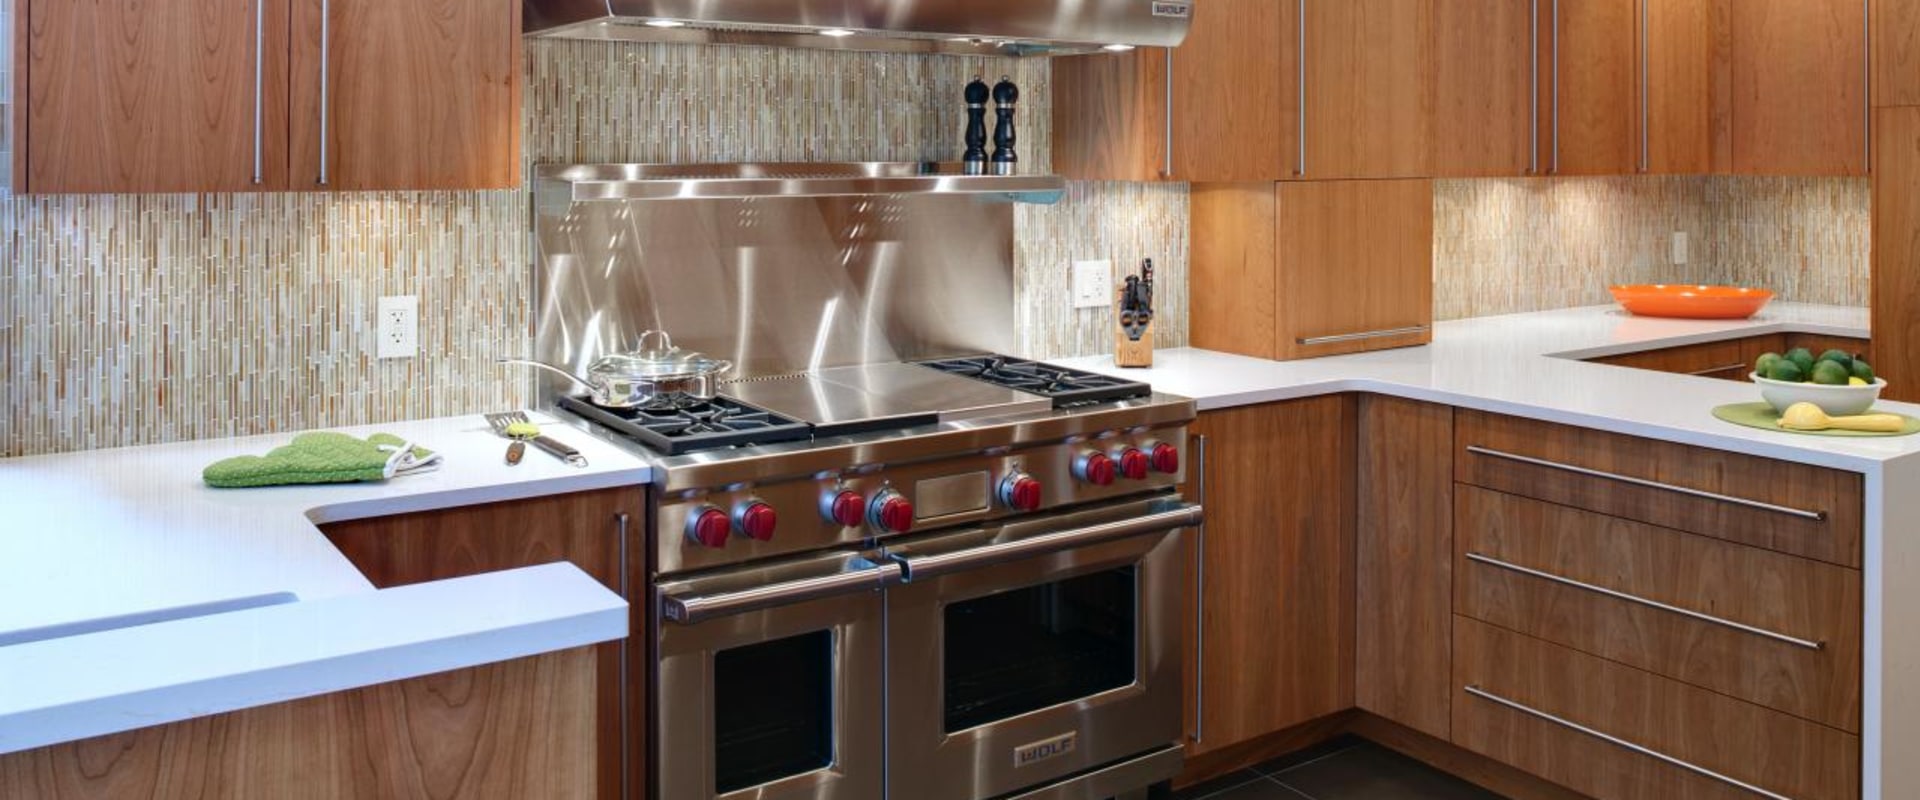 Which company is best for kitchen appliances?